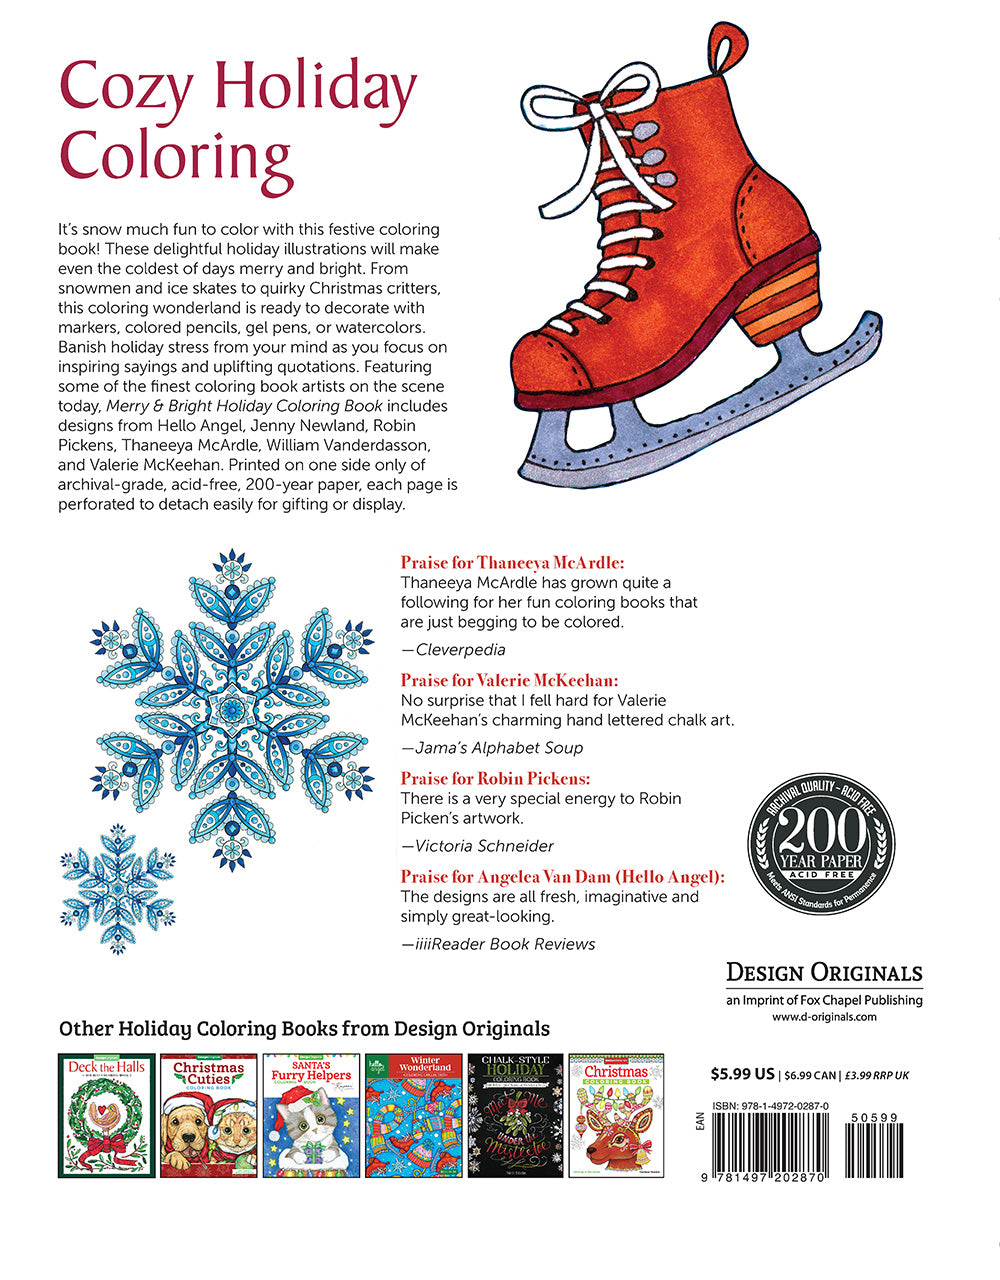 Merry & Bright Holiday Coloring Book